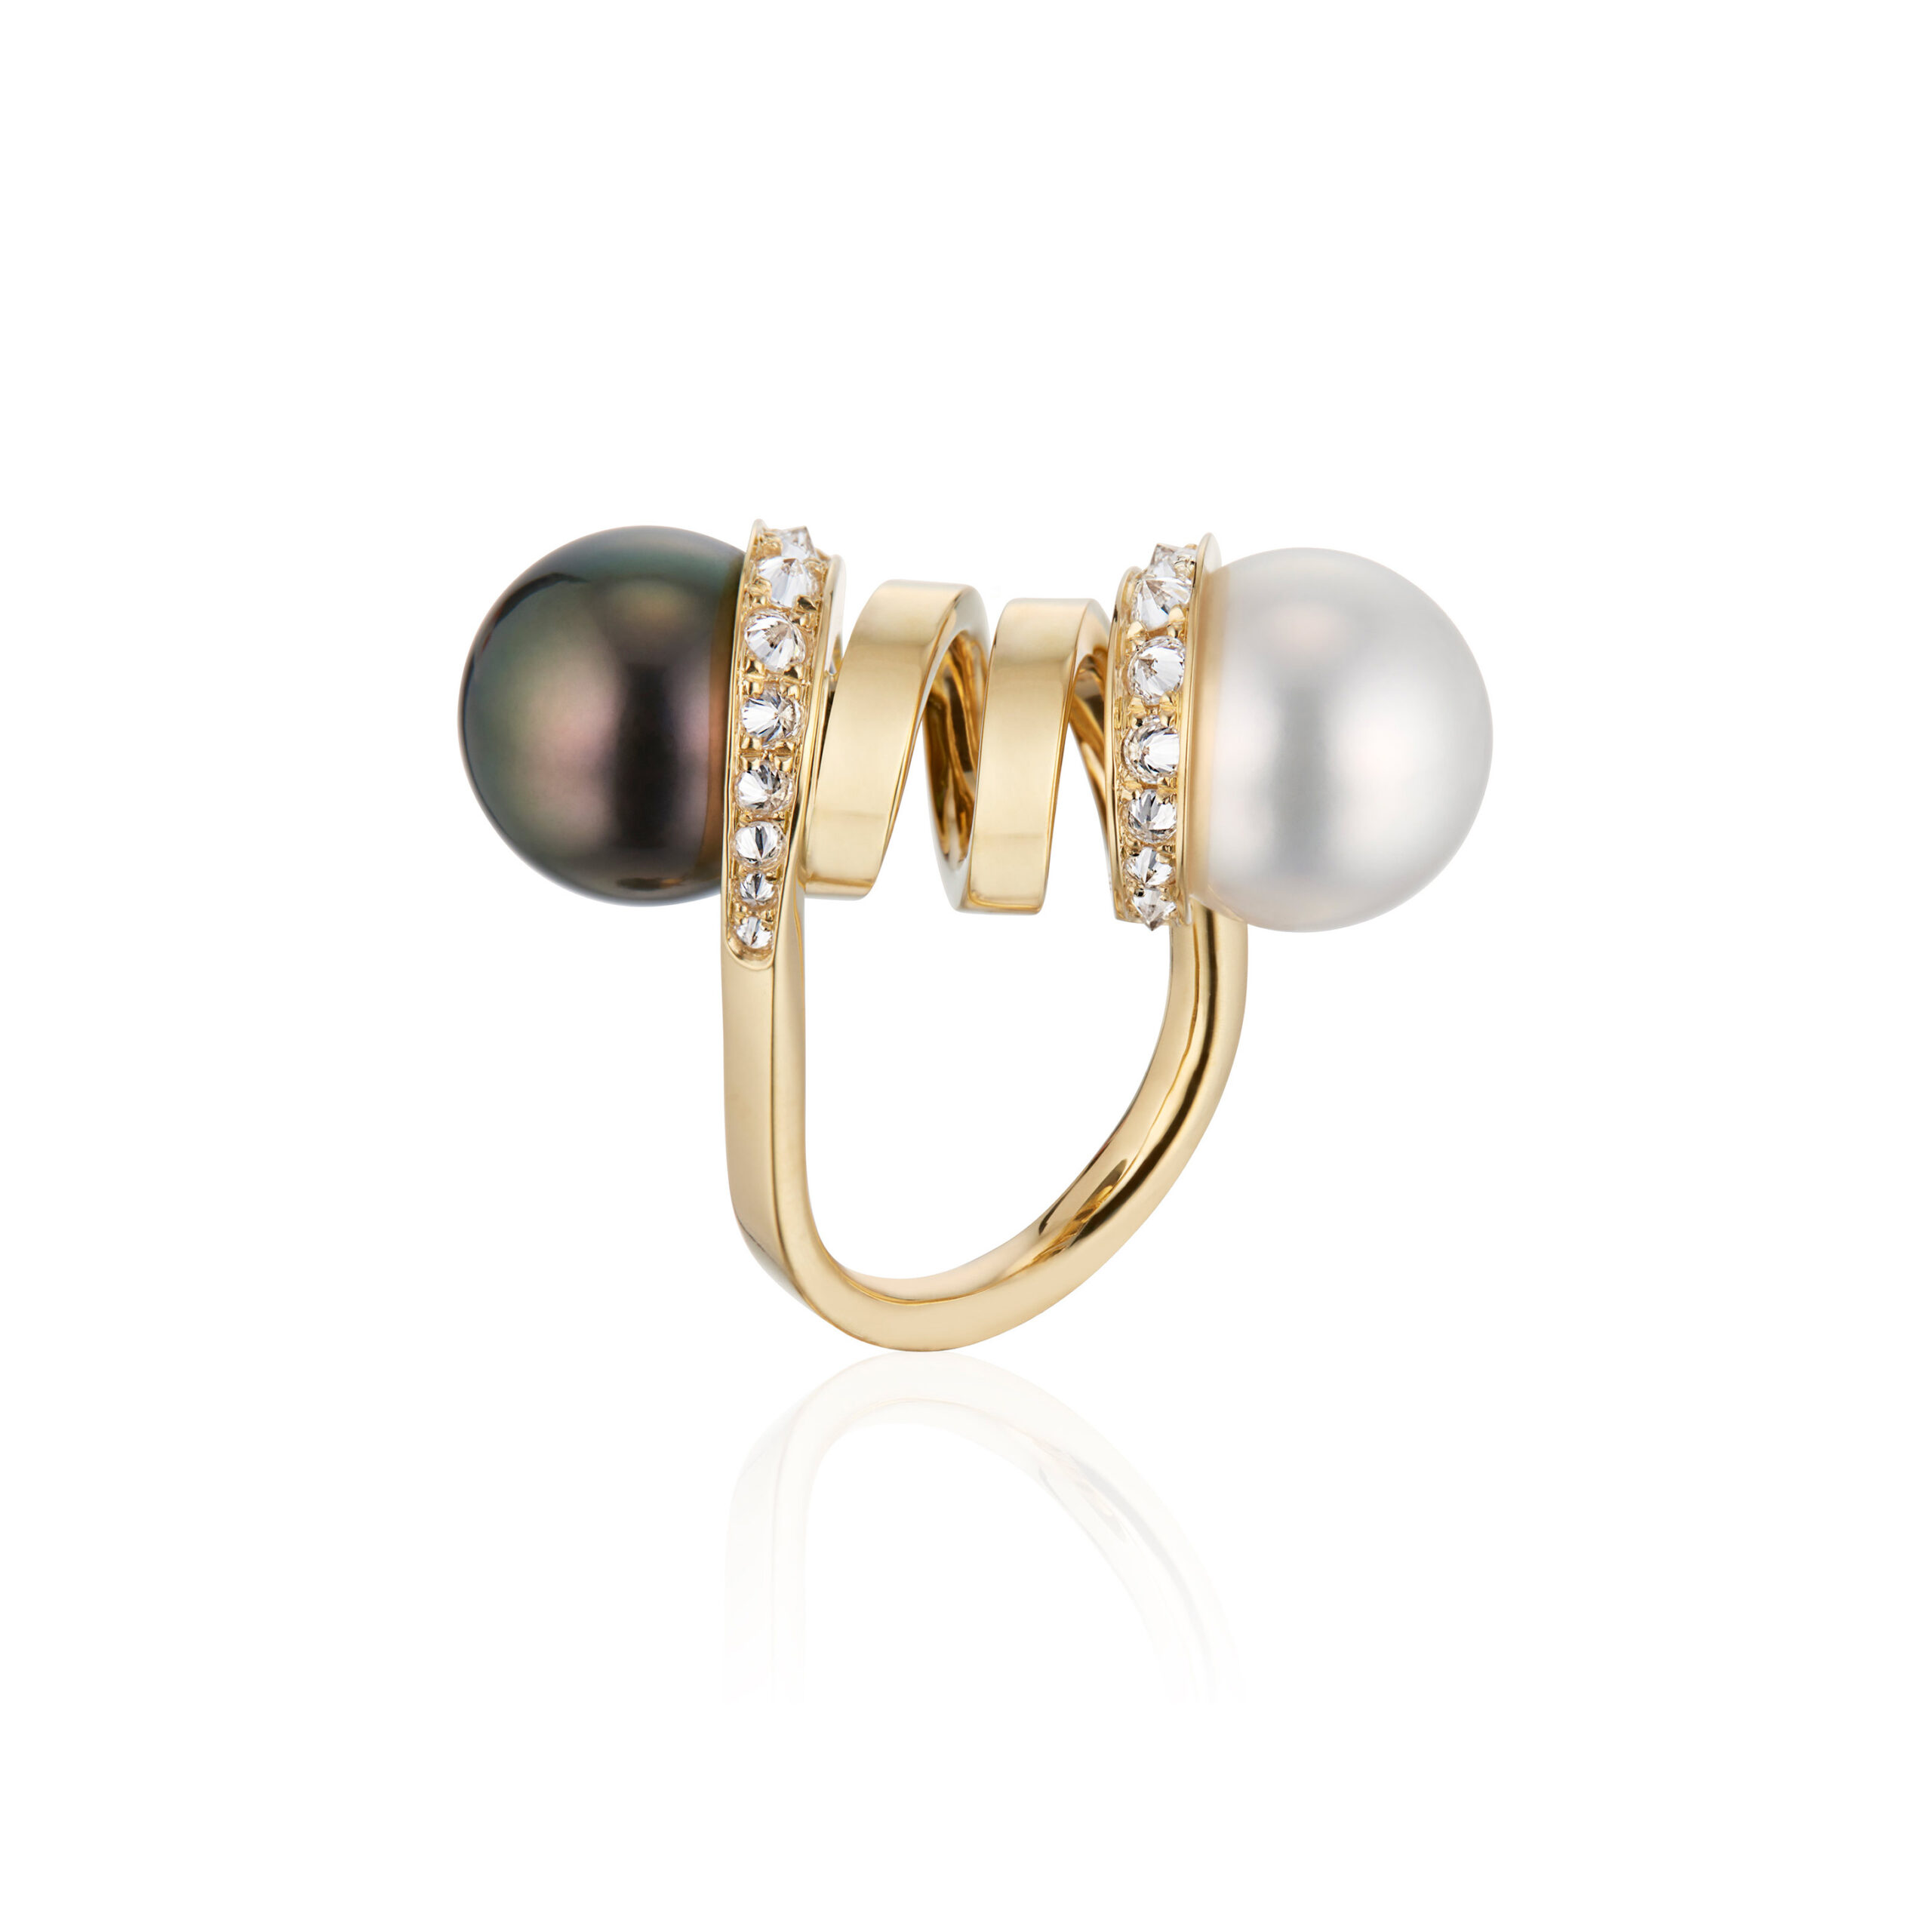 This is a profile photo of the Renisis Double Pearl Curl Ring, featuring 18K yellow gold with inverted diamonds and one white South Sea and one black Tahitian Pearl. Both contrasting pearls are on opposite side of the curled gold.